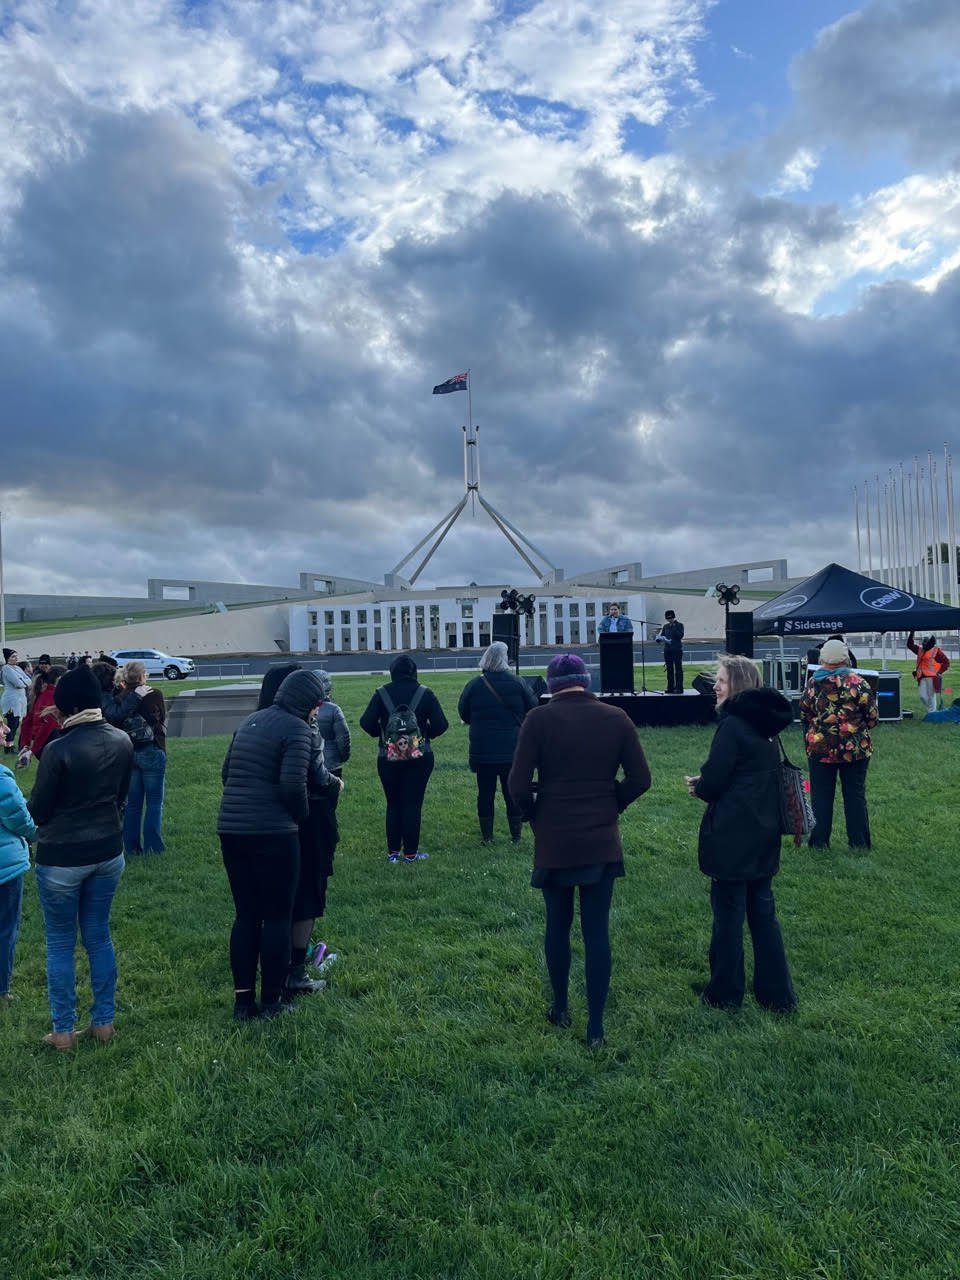 a group of people standing on grass facing a speaker at a podium in front of the Parliament House, Australia